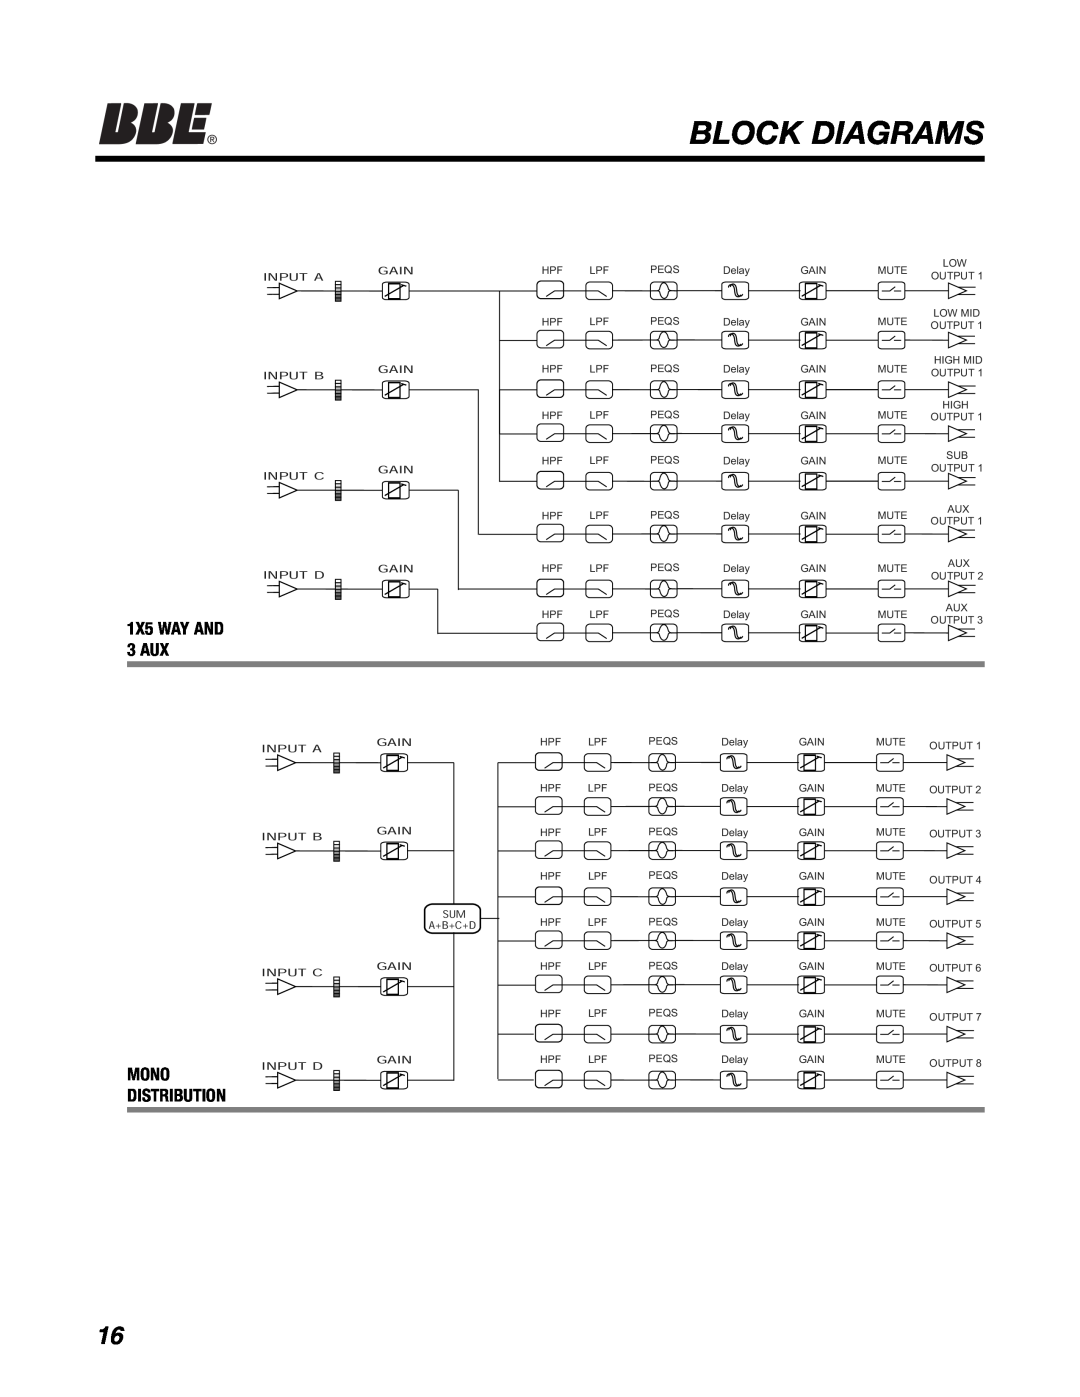 BBE DS48 manual Block Diagrams, 1X5 WAY AND 3 AUX, Mono Distribution 